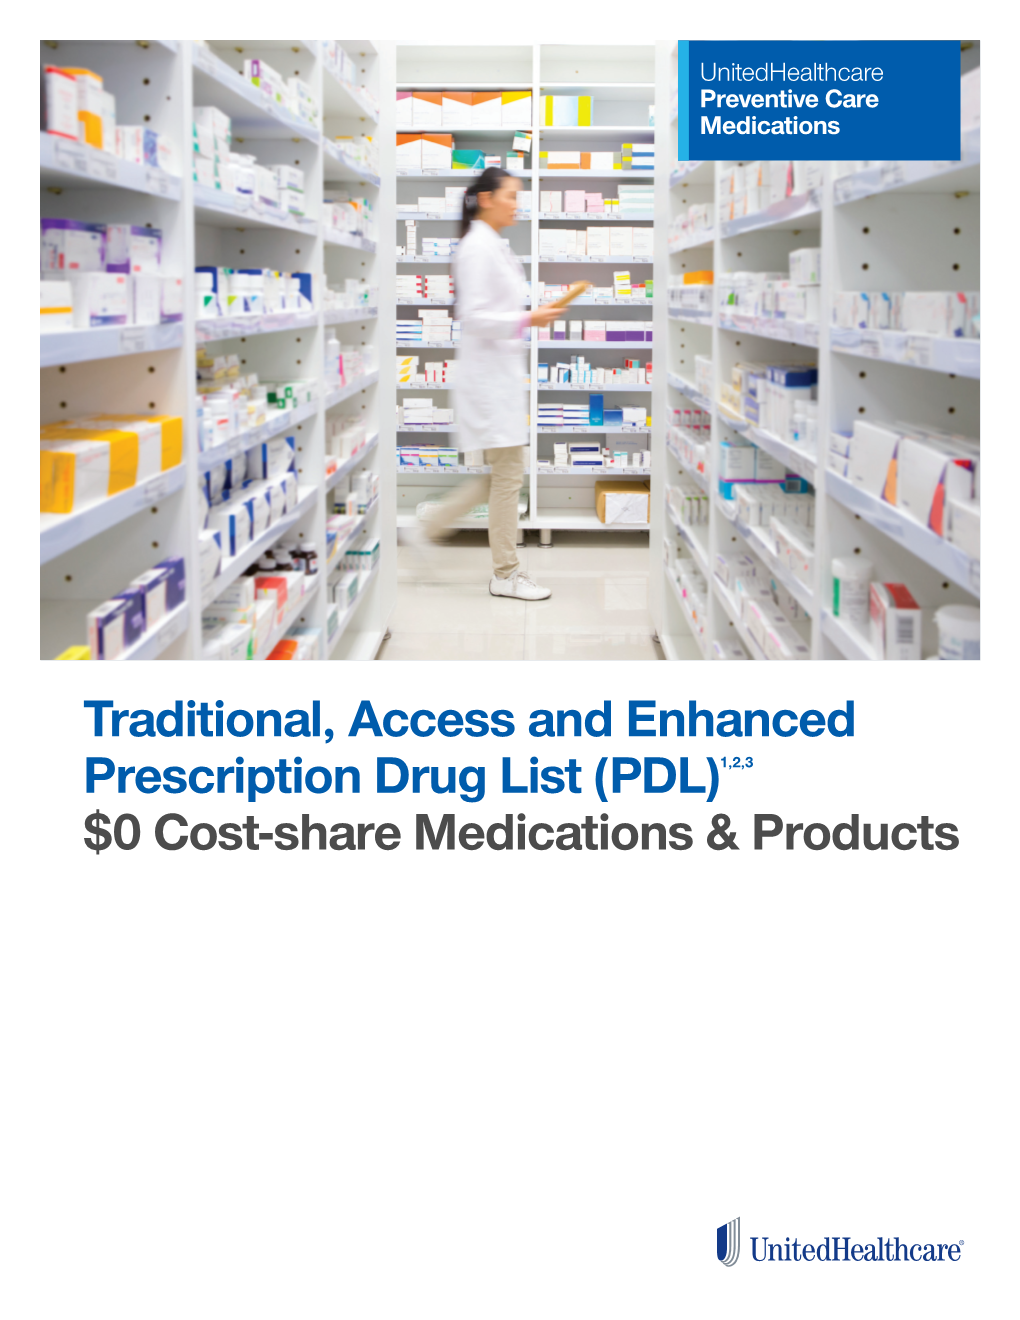 Traditional, Access and Enhanced Prescription Drug List (PDL)1,2,3 $0 Cost-Share Medications & Products U.S